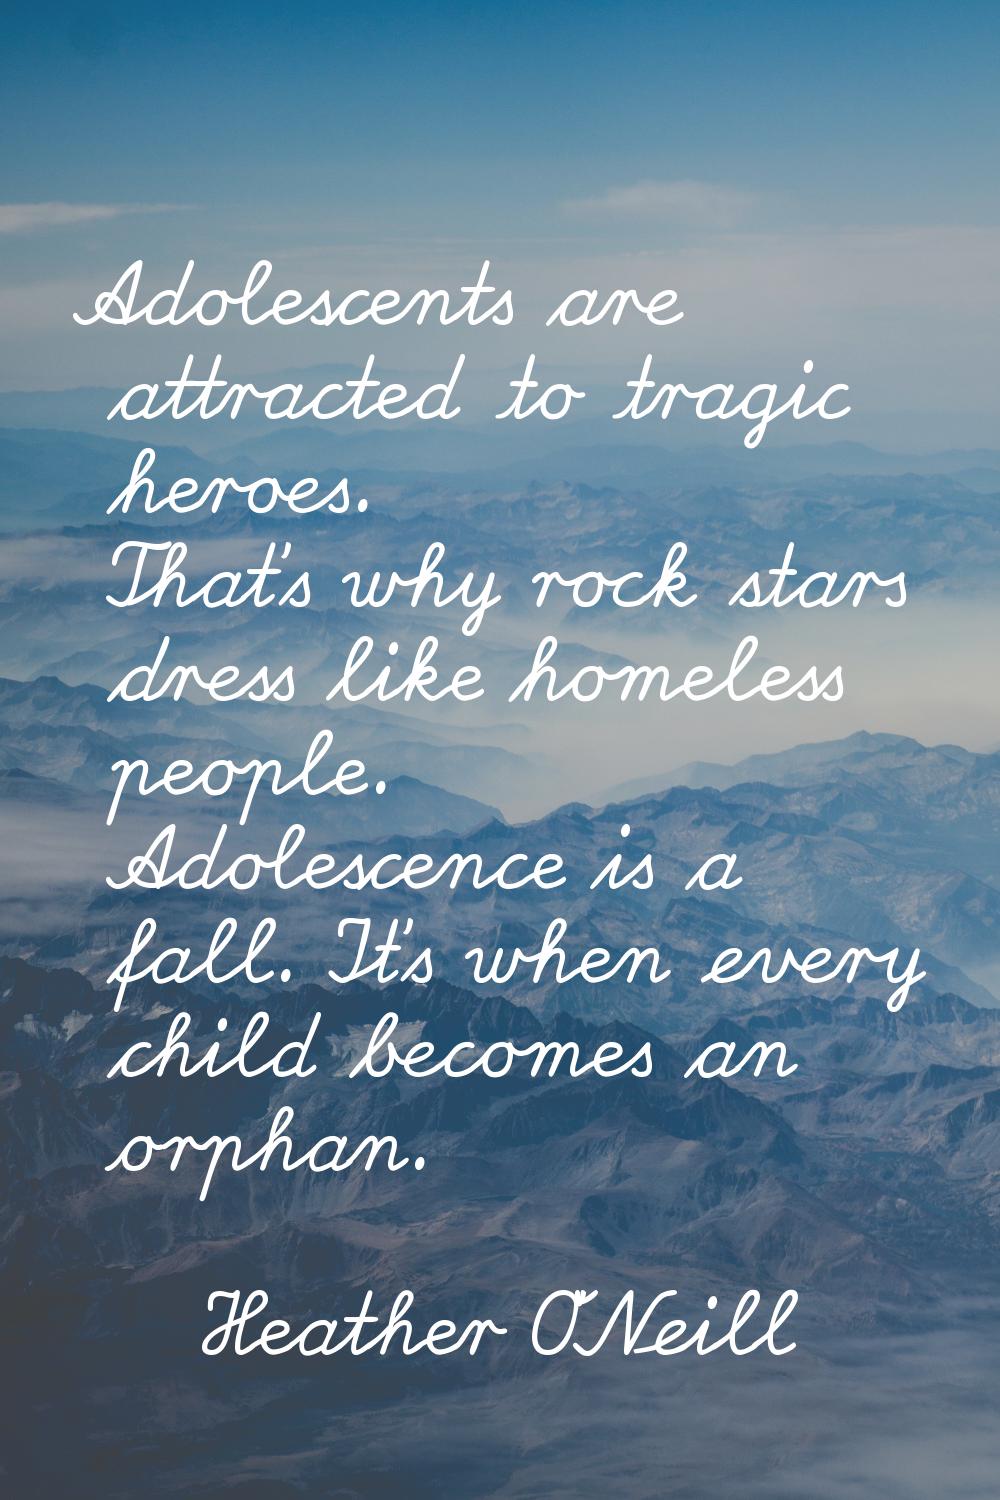 Adolescents are attracted to tragic heroes. That's why rock stars dress like homeless people. Adole